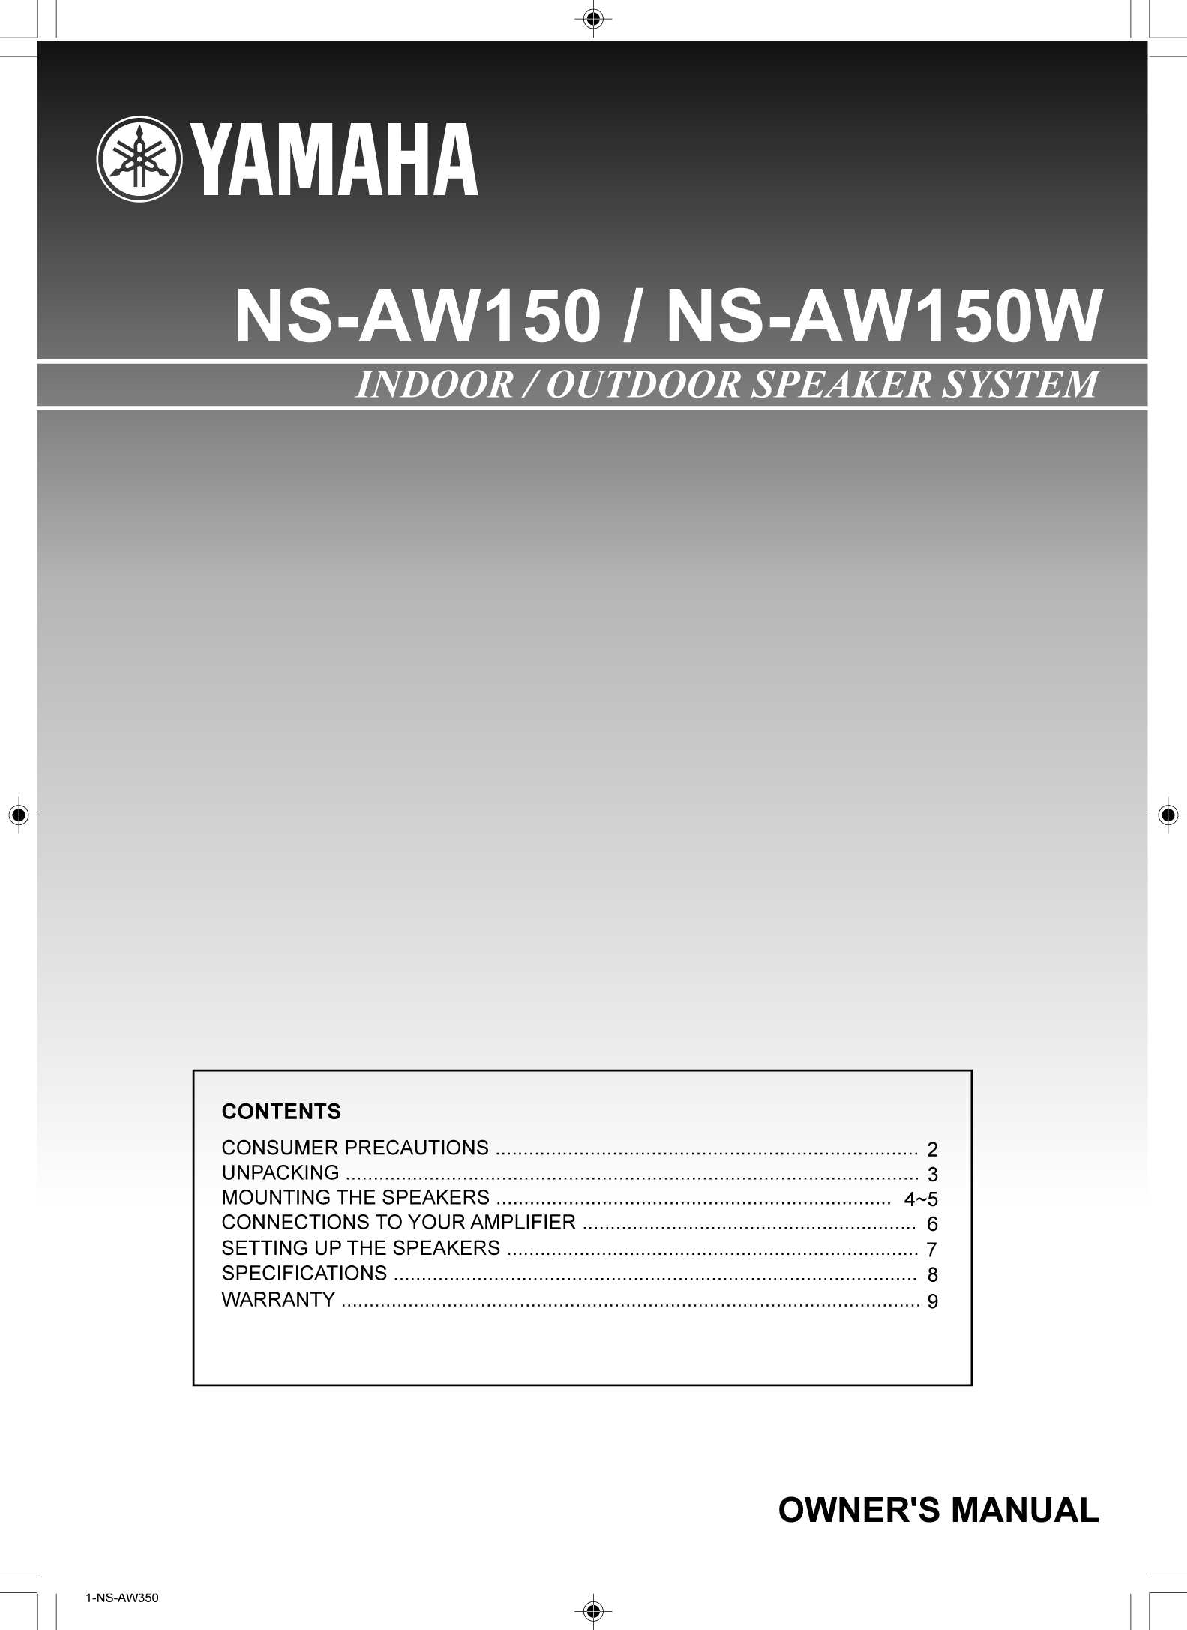 Yamaha NS-AW150, NS-AW150W Owners Manual